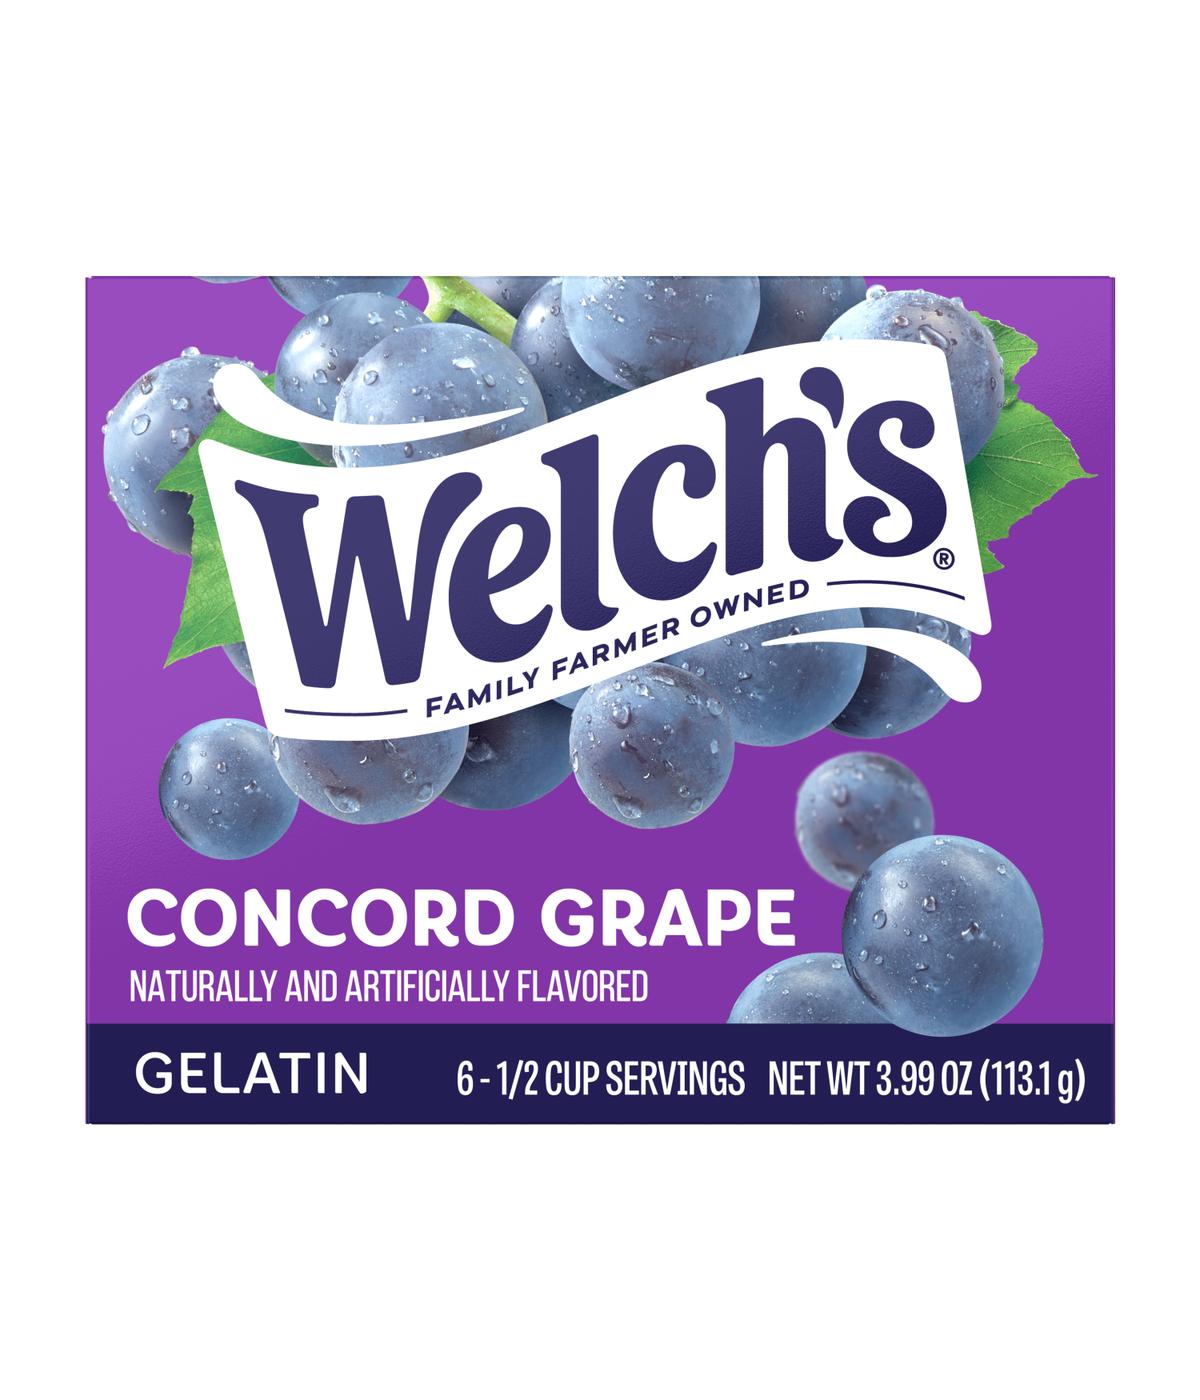 Welch's Gelatin - Concord Grape; image 1 of 4